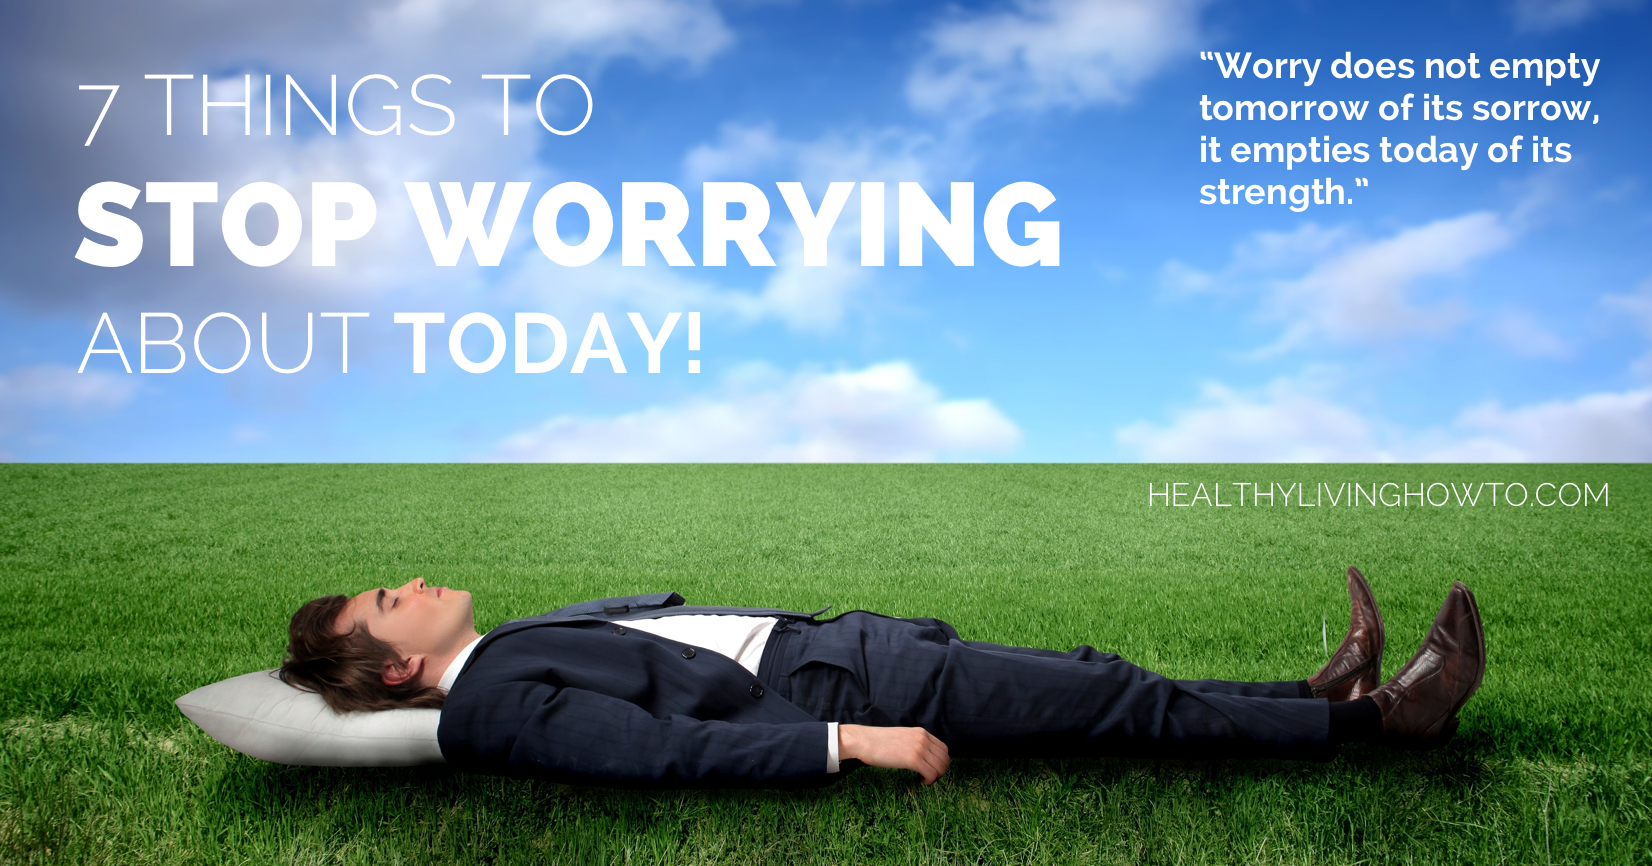 7 Things To Stop Worrying About Today | healthylivinghowto.com